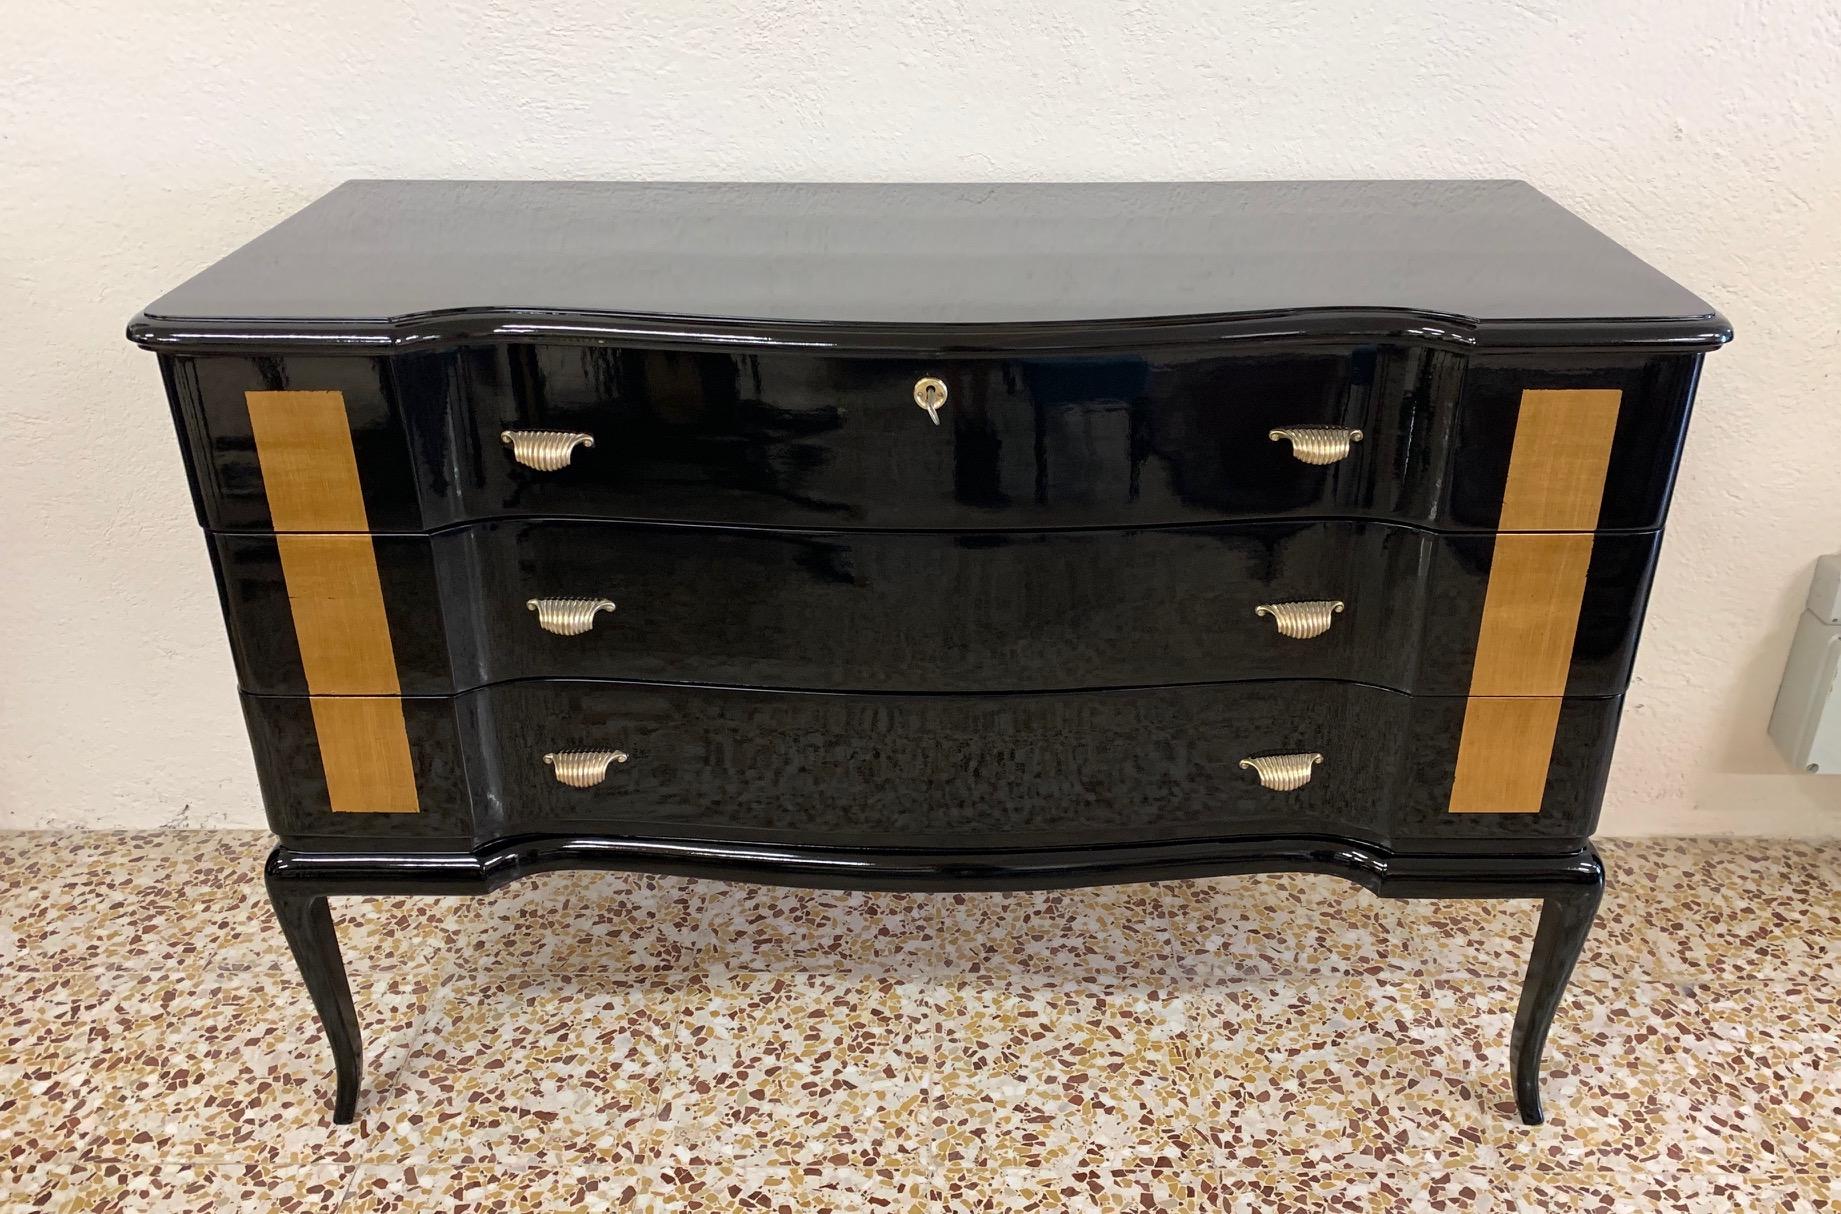 This dresser was produced in the 1950s in Italy.
It is completely black lacquered while the front is decorated with gold leaf.
The brass handles complete the elegance of the dresser.